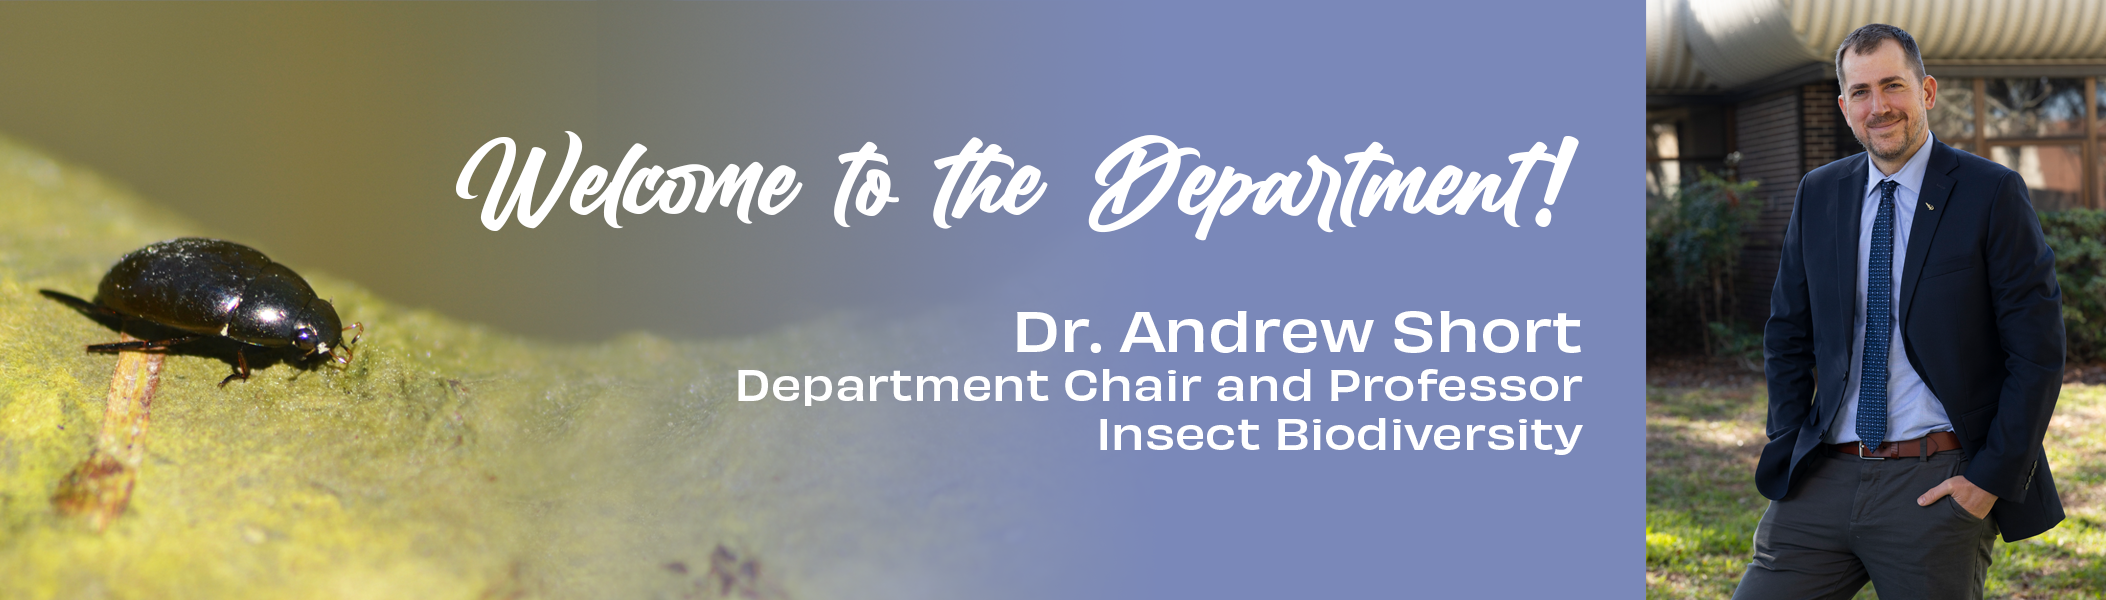 a web slider welcoming Dr. Andrew Short